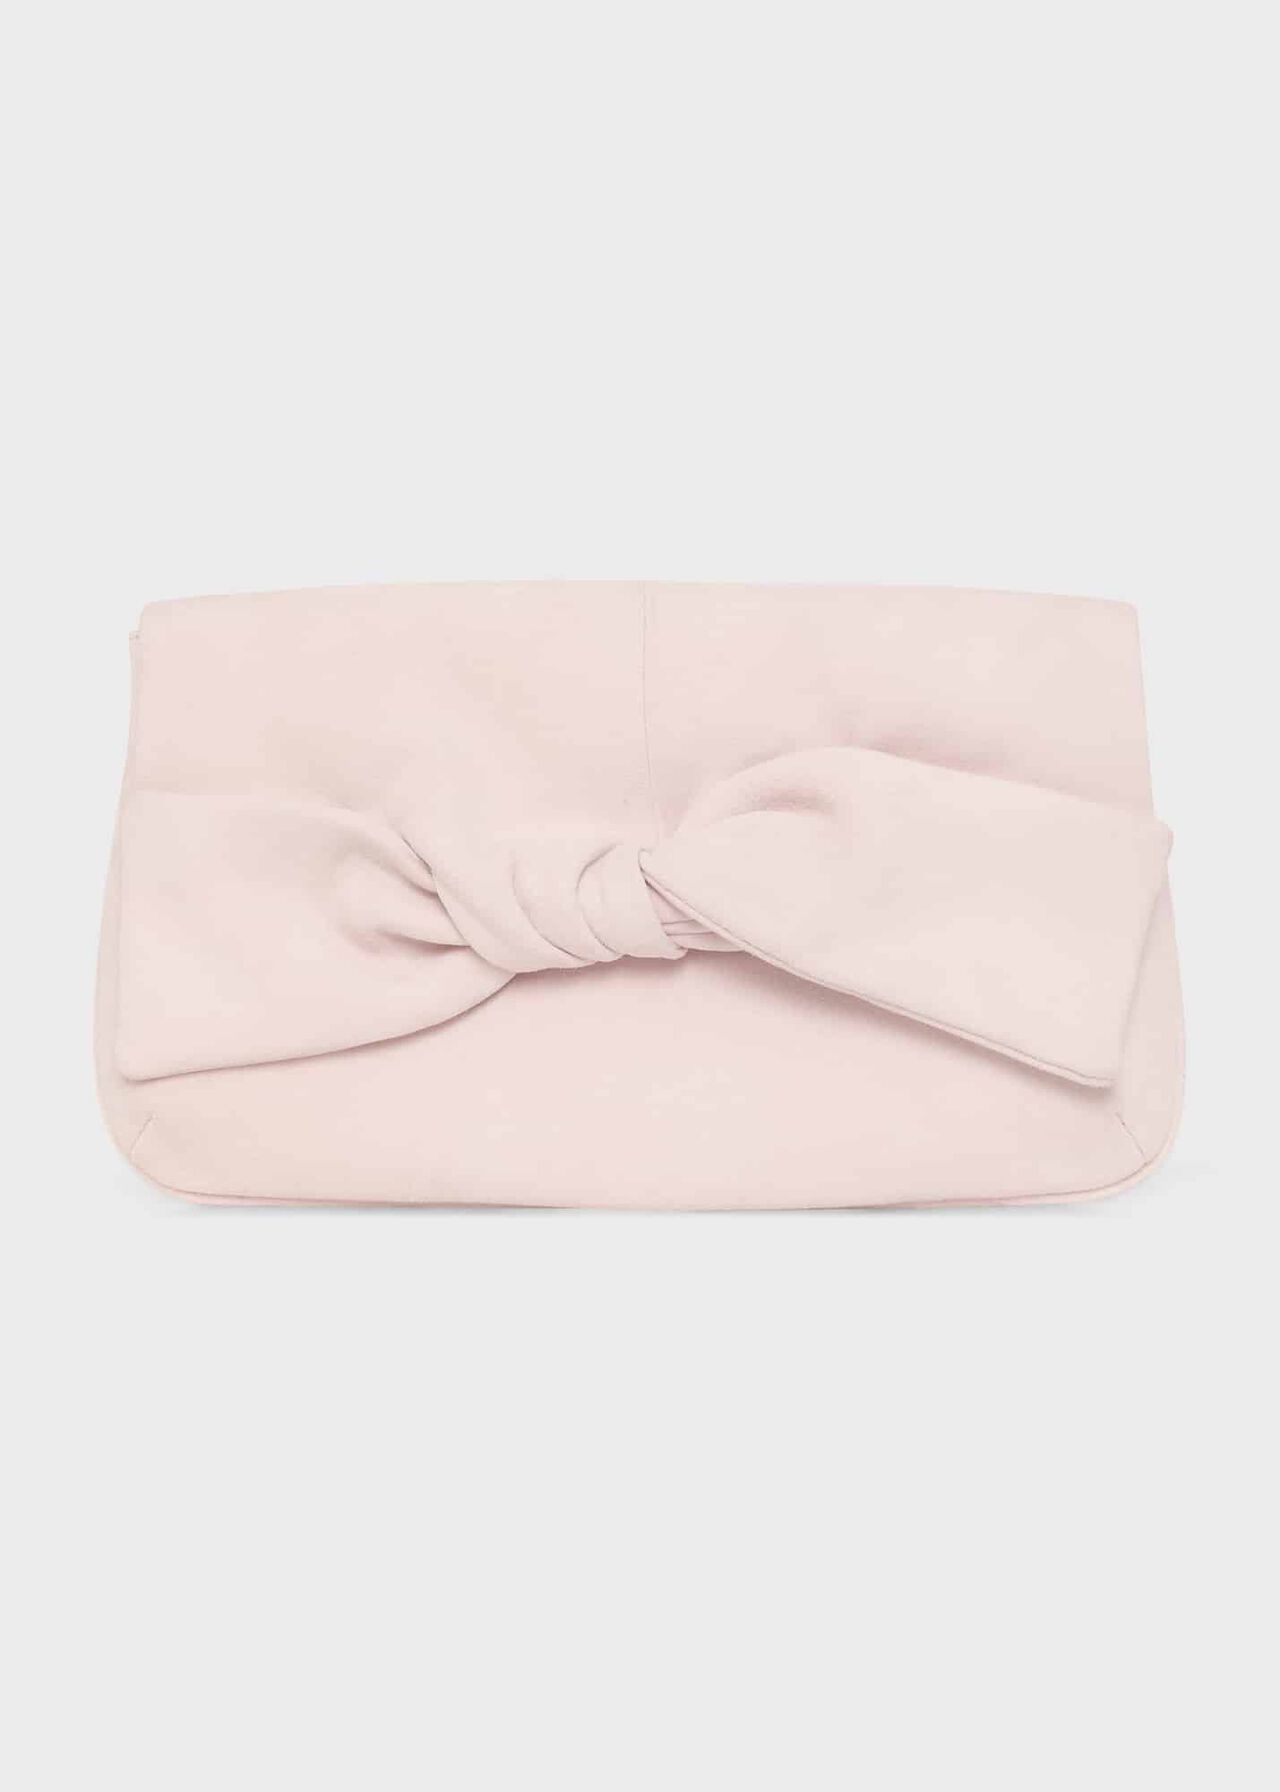 Milly Bow Clutch, Pale Pink, hi-res